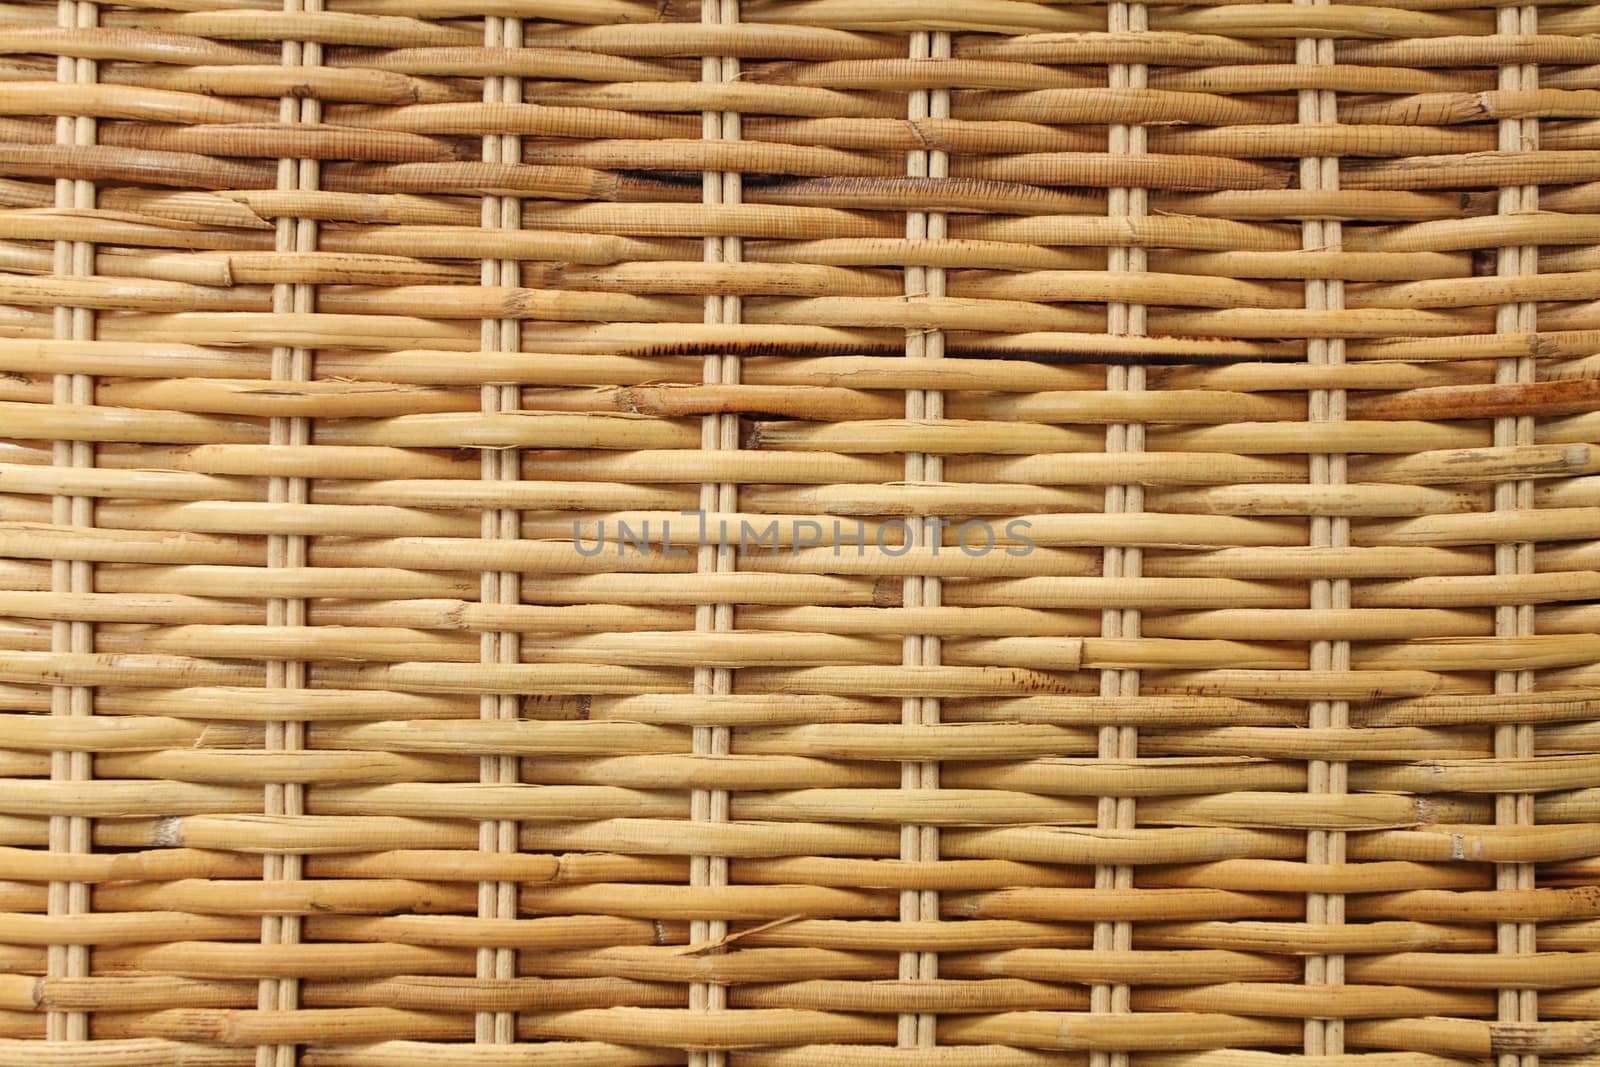 Woven rattan texture backgrounds by photosoup